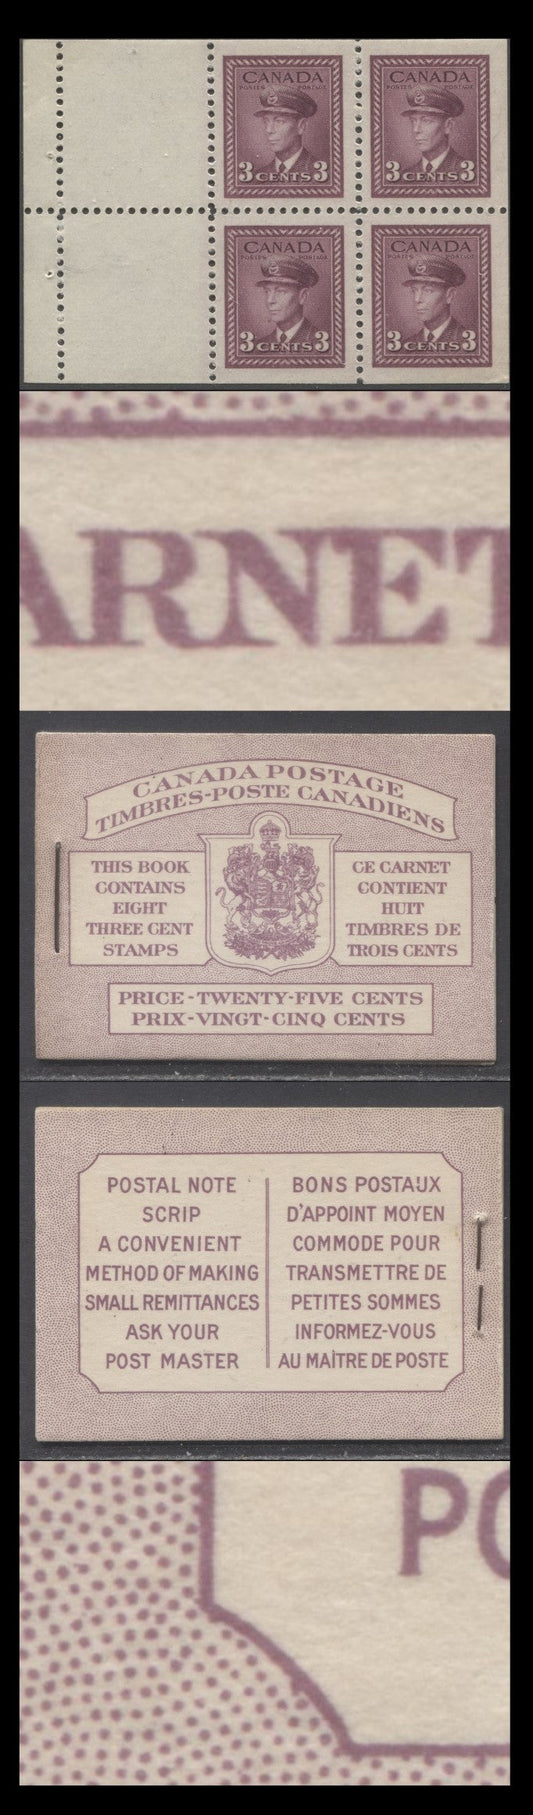 Lot 86 Canada #BK35cB 1942-1947 War Issue, A Complete 25c Bilingual Booklet, 2 Panes Of 4+2 Labels 3c Rose Violet, Front Cover IIIc, Back Cover Fbi, Type IIa, 7c & 6c Rates, 'Post Master' Two Words, 407,000 Issued